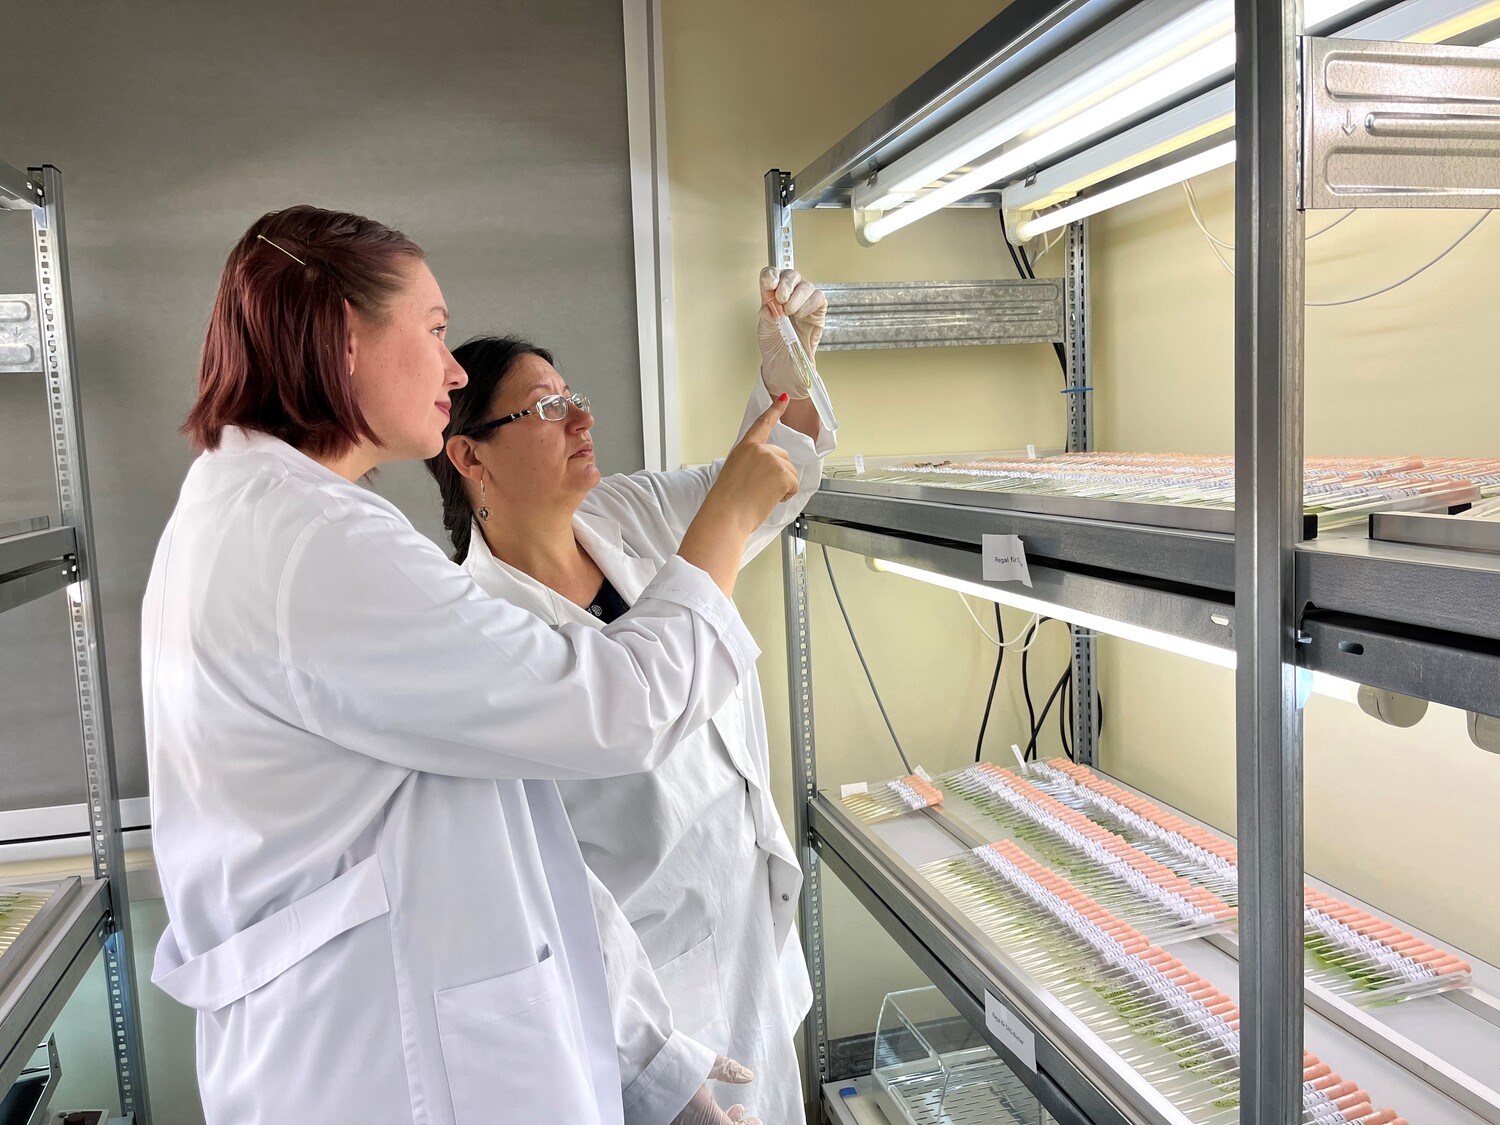 Researchers Janine Fürst-Jansen and Dr Tatyana Darienko carry out experiments in the unique experimental set-up of the Algal Culture Collection at Göttingen University to see how one of the closest algal relatives of land plants, a single-celled alga called Mesotaenium endlicherianum, responds to light and temperature.